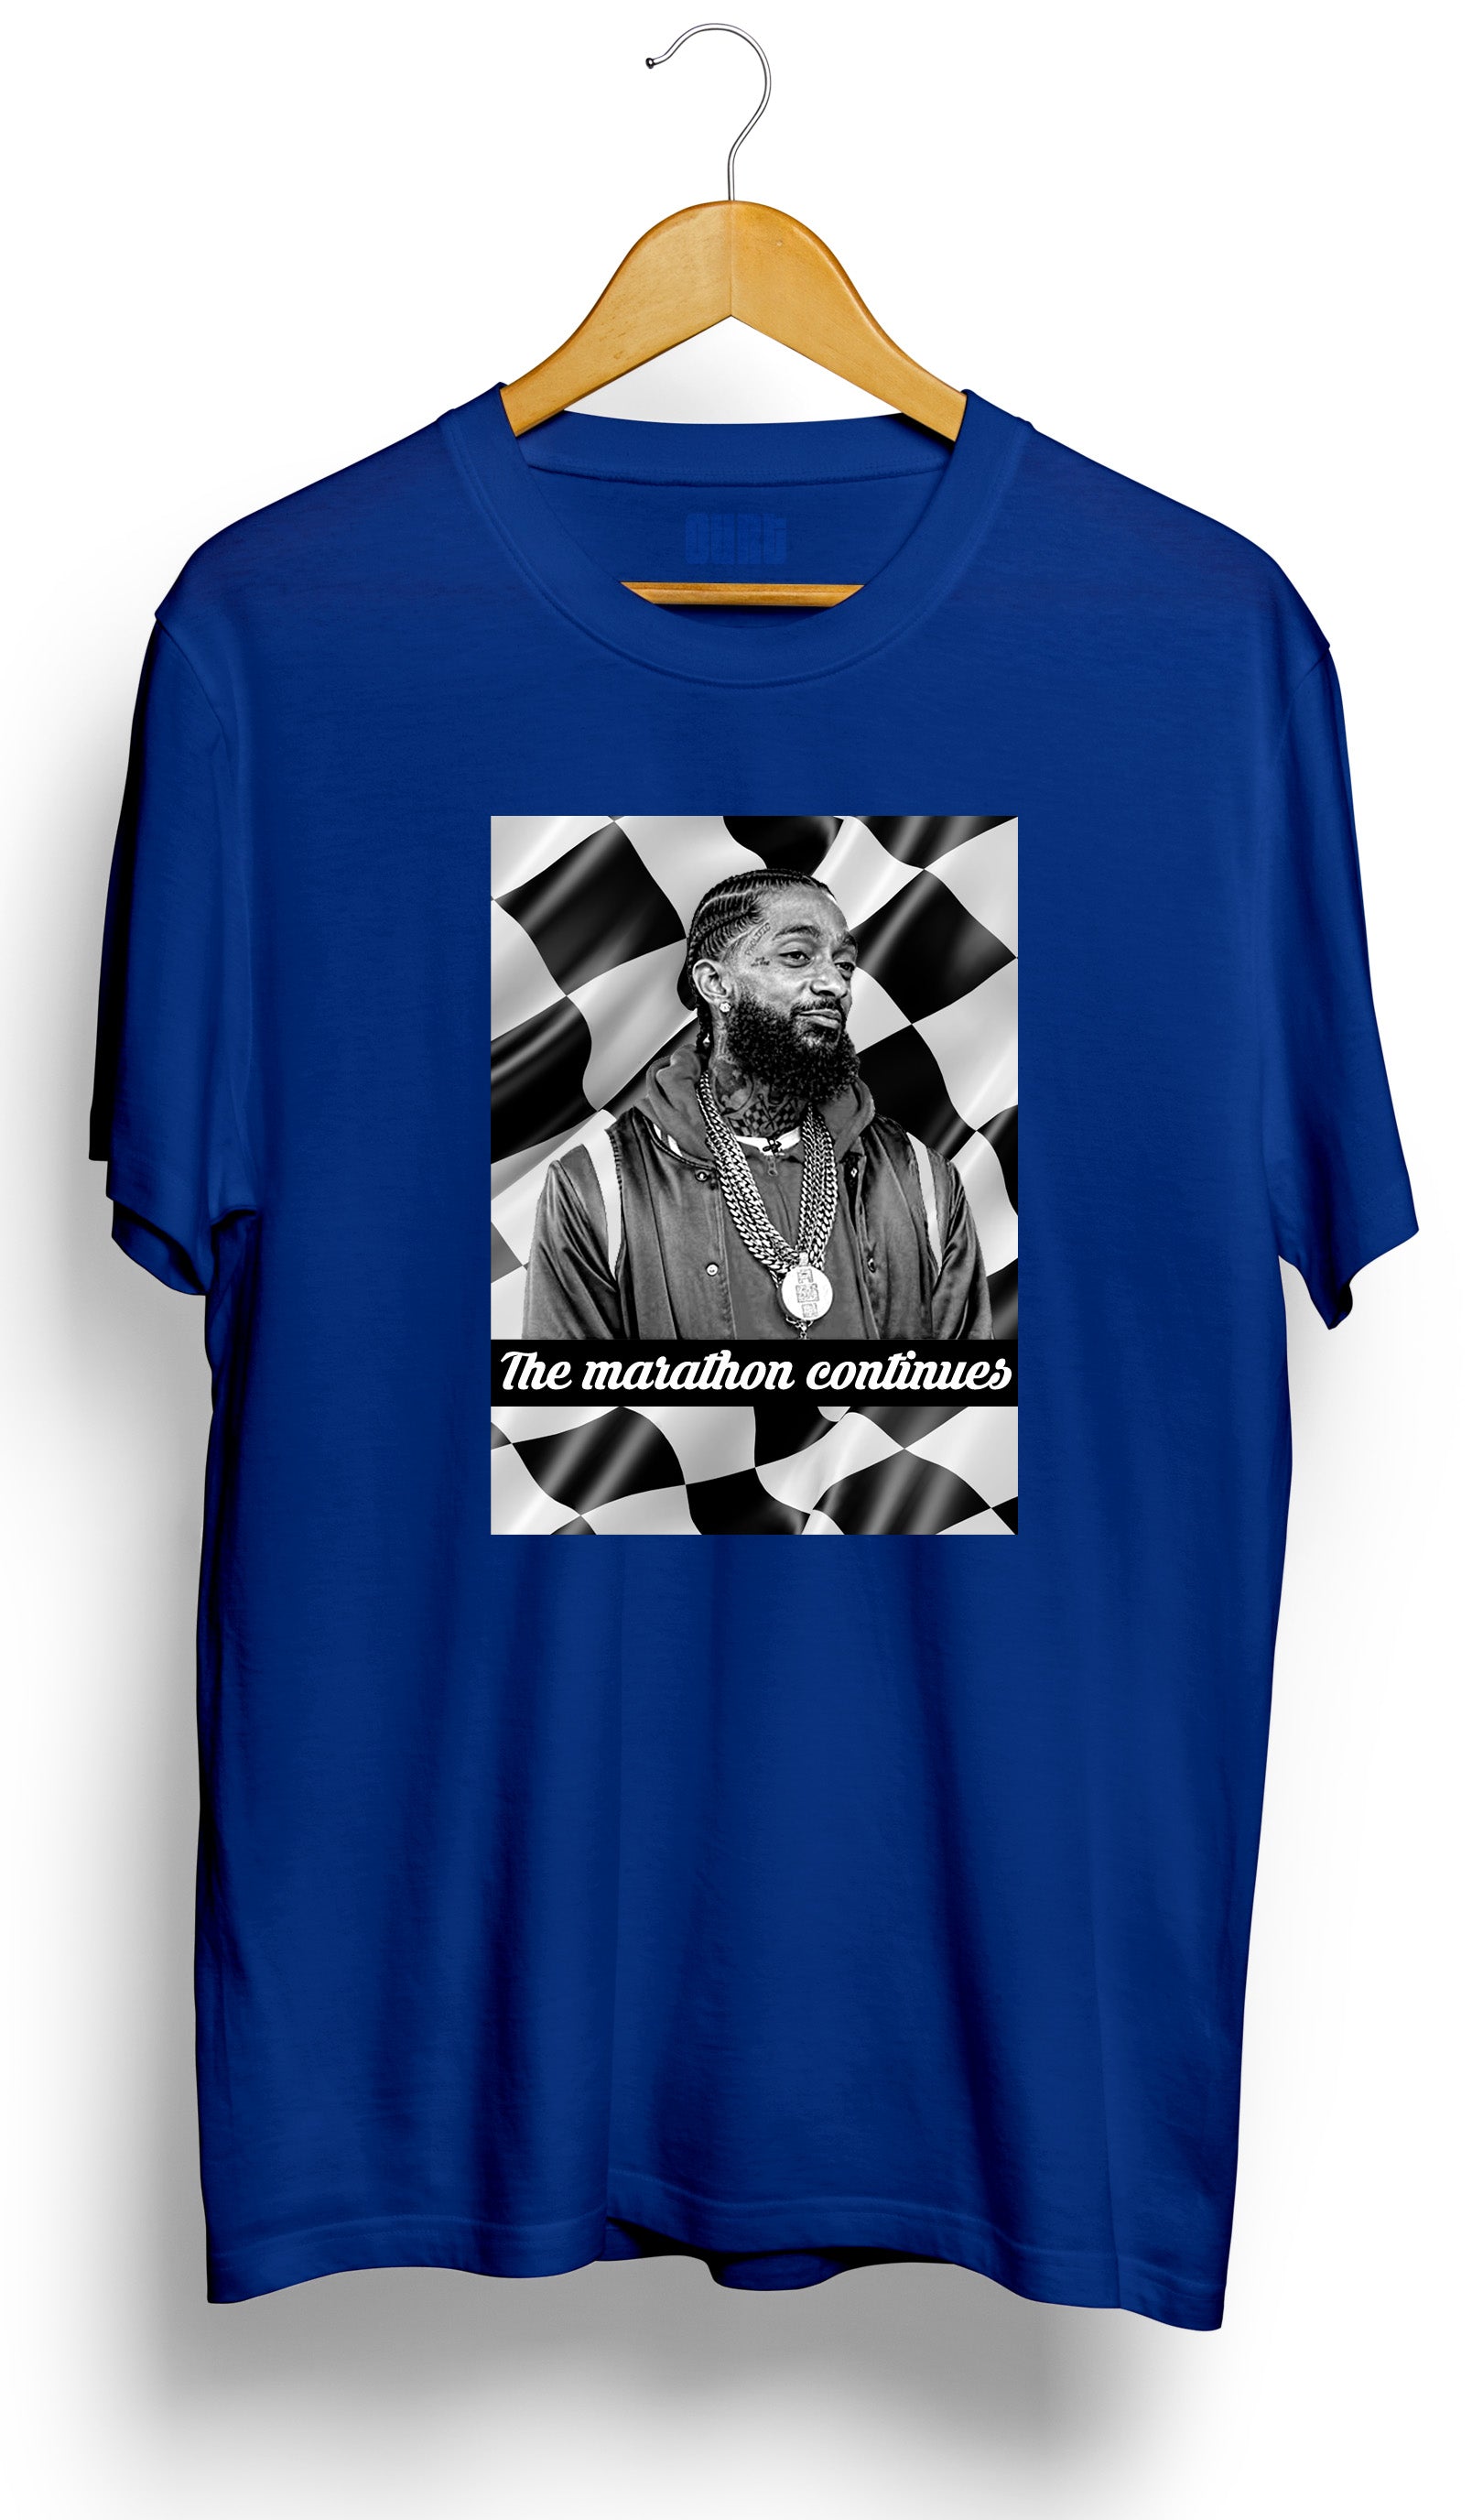 Nipsey Hussle Women's T-Shirts & Tops for Sale